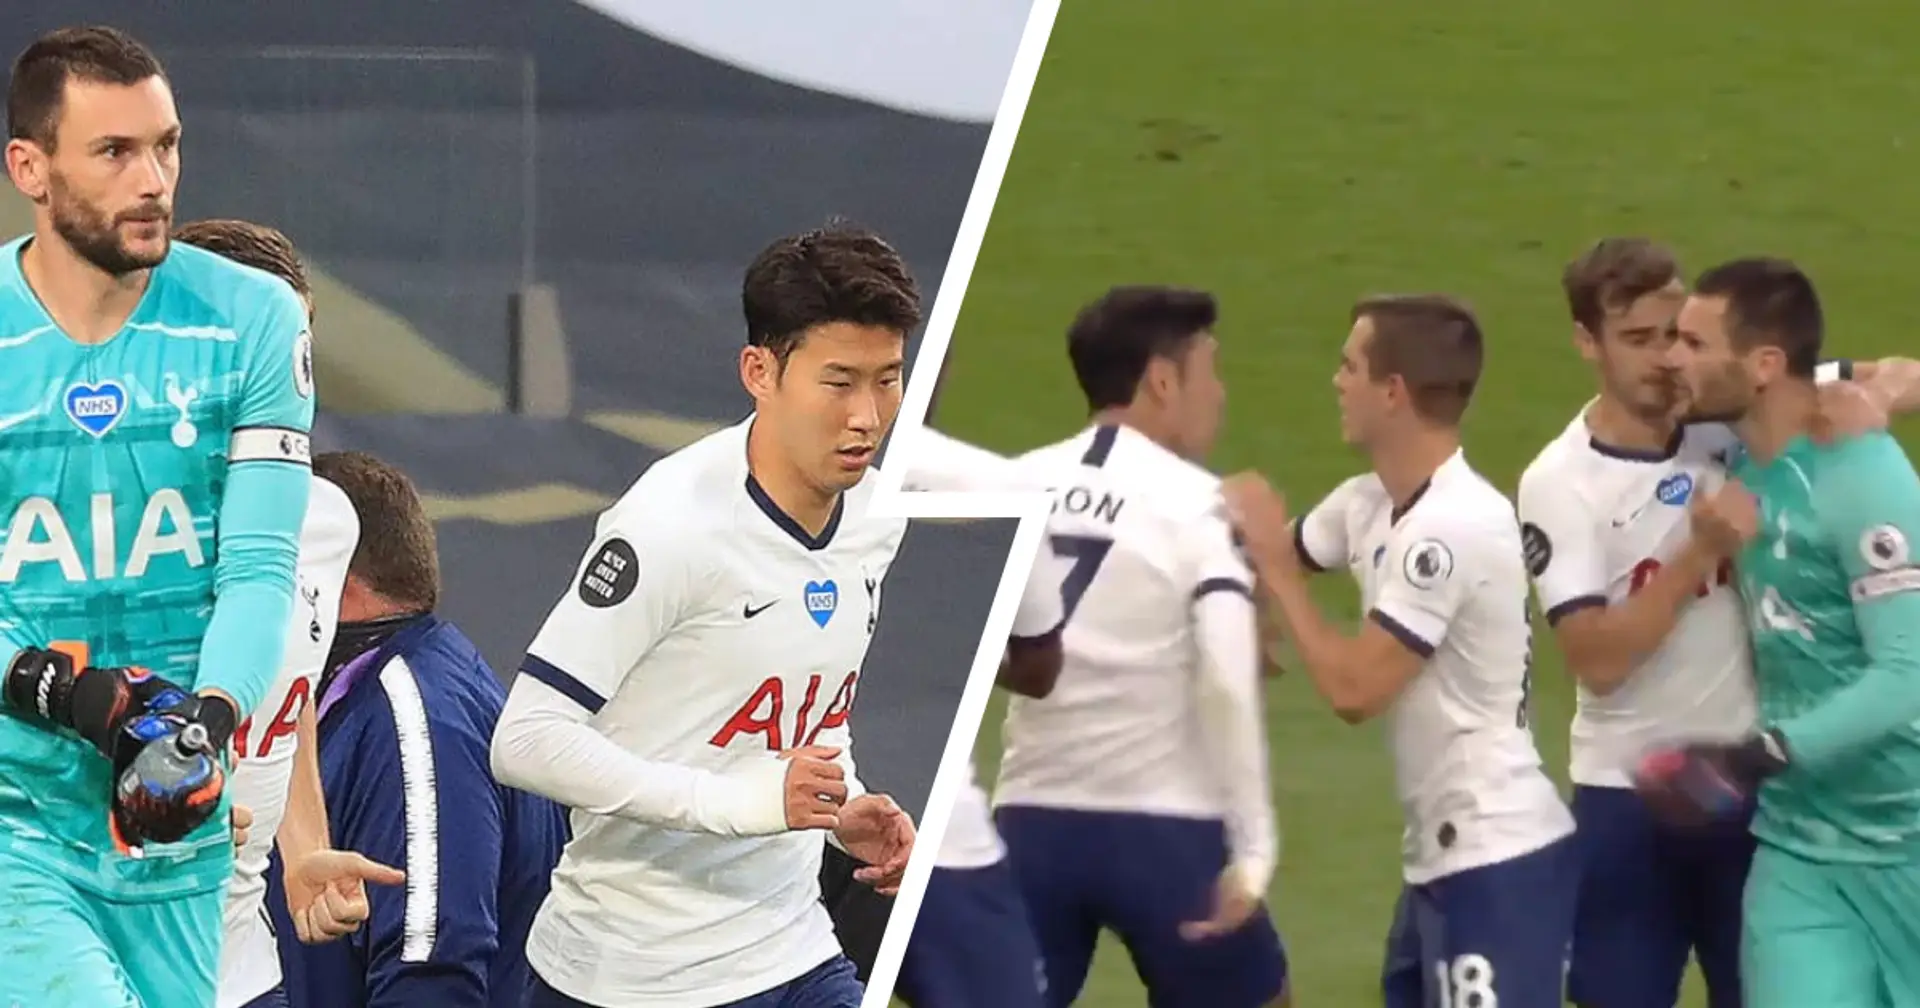 Sparks flying: Hugo Lloris involved in half-time bust-up with Tottenham teammate Son Heung-min 